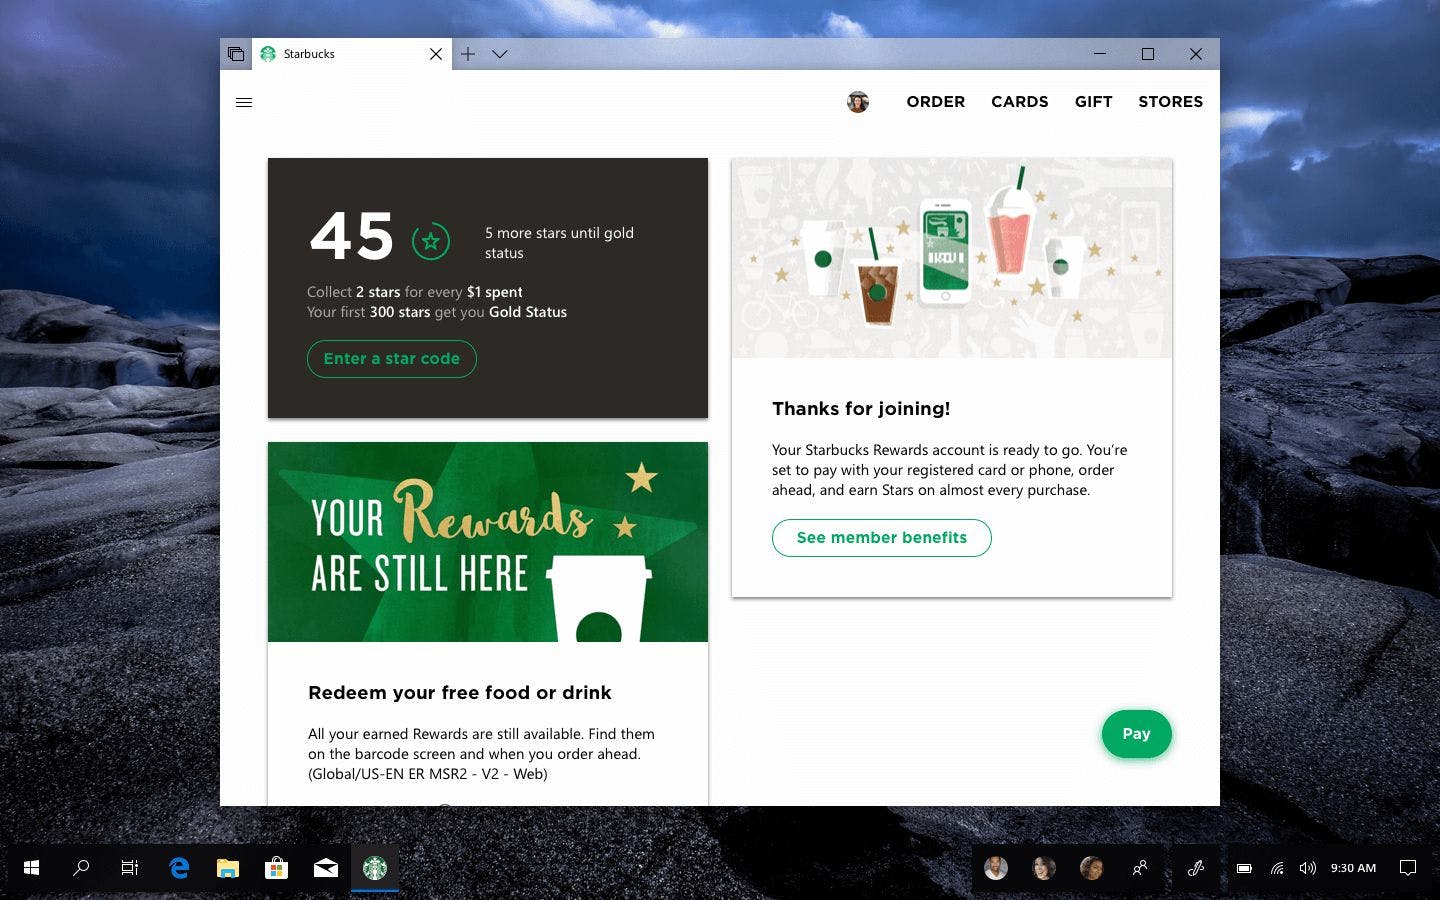 The homepage of a Starbucks app mockup—showing a similar navigation style to the Photos and Microsoft Store apps, but styled to match Starbucks' brand.